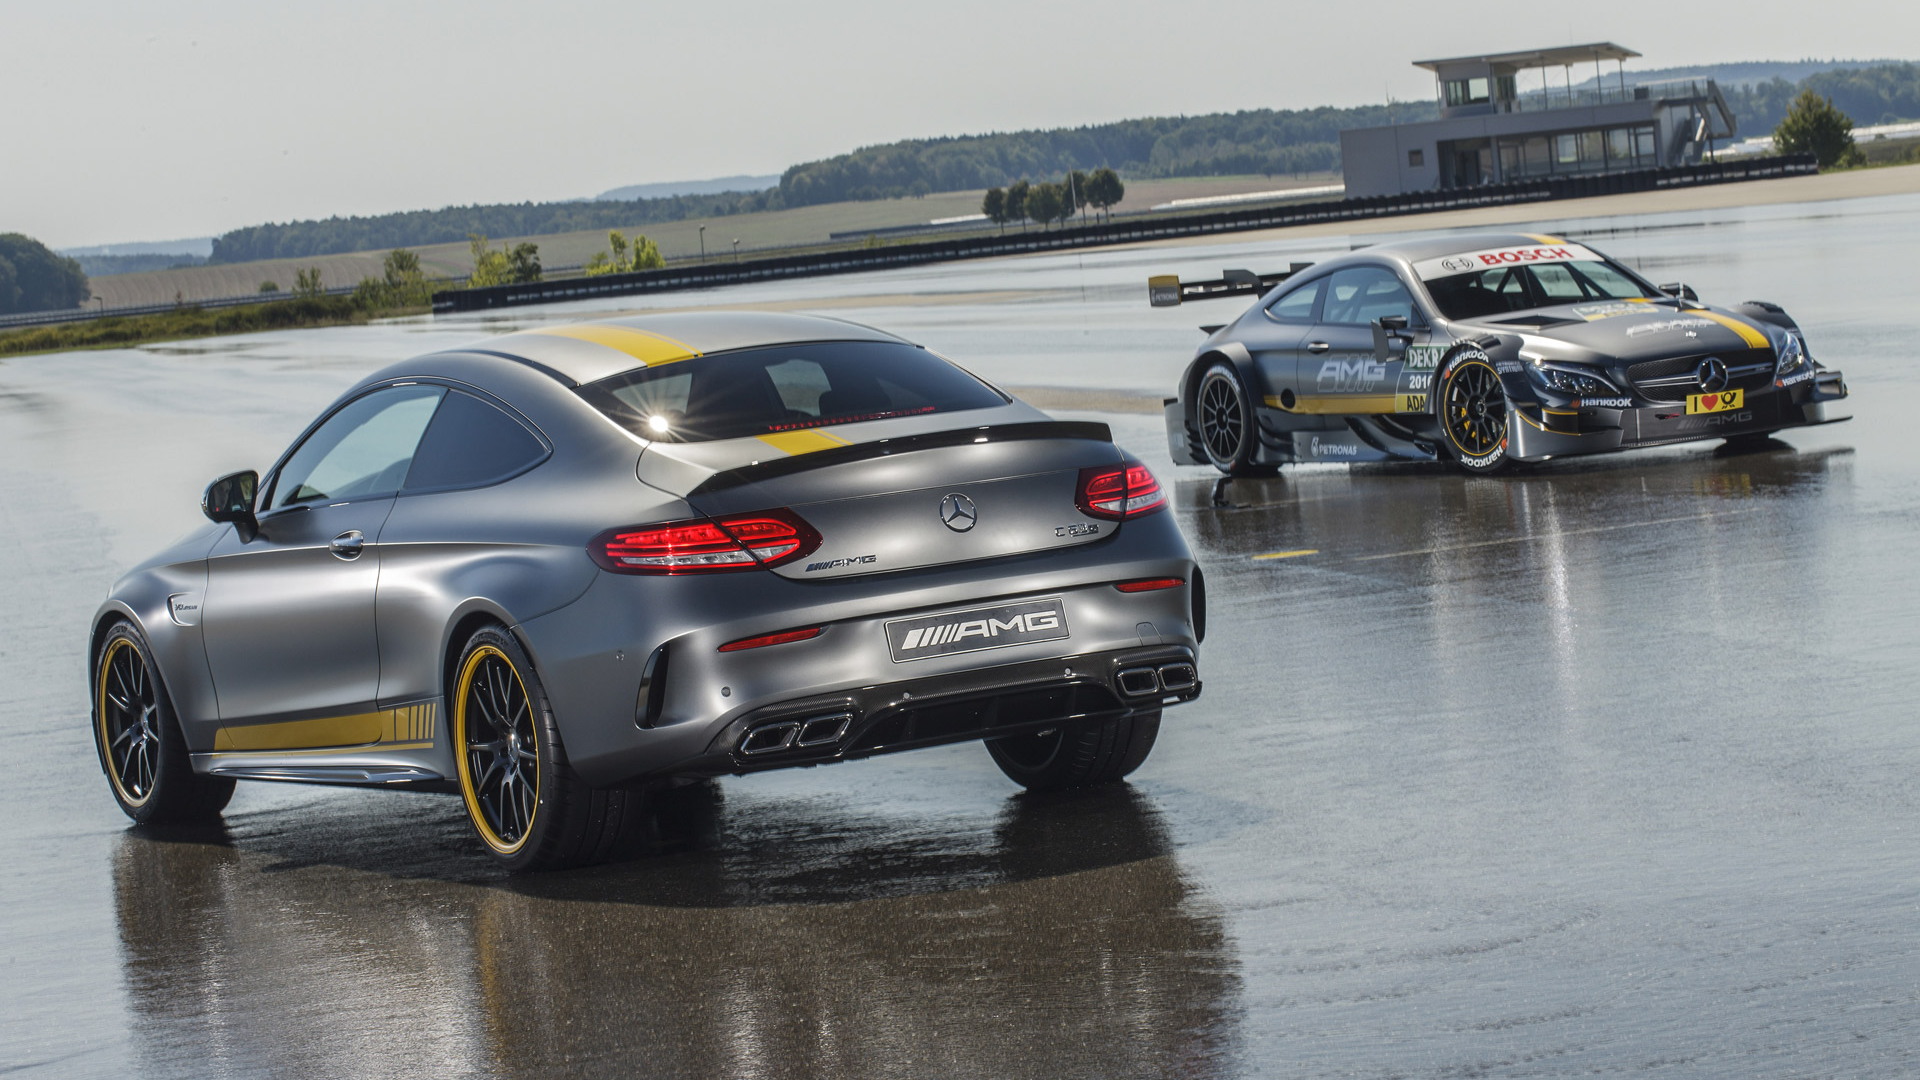 2017 Mercedes-AMG C63 Coupe Edition 1 and 2016 C63 DTM race car